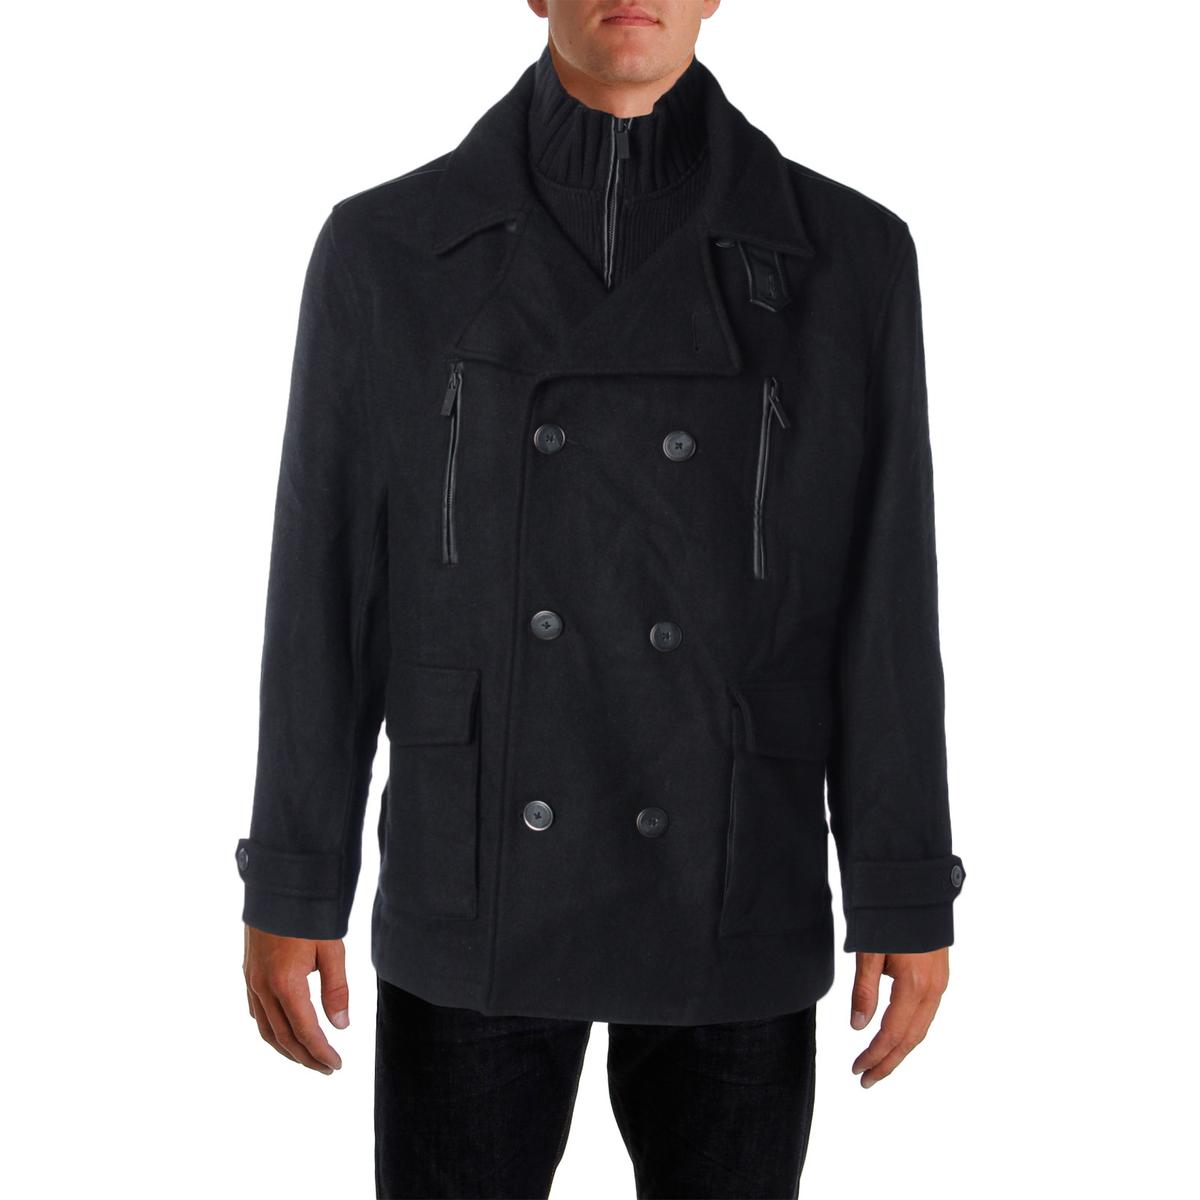 Kenneth Cole Reaction 5933 Mens Wool Blend Double-Breasted Pea Coat ...